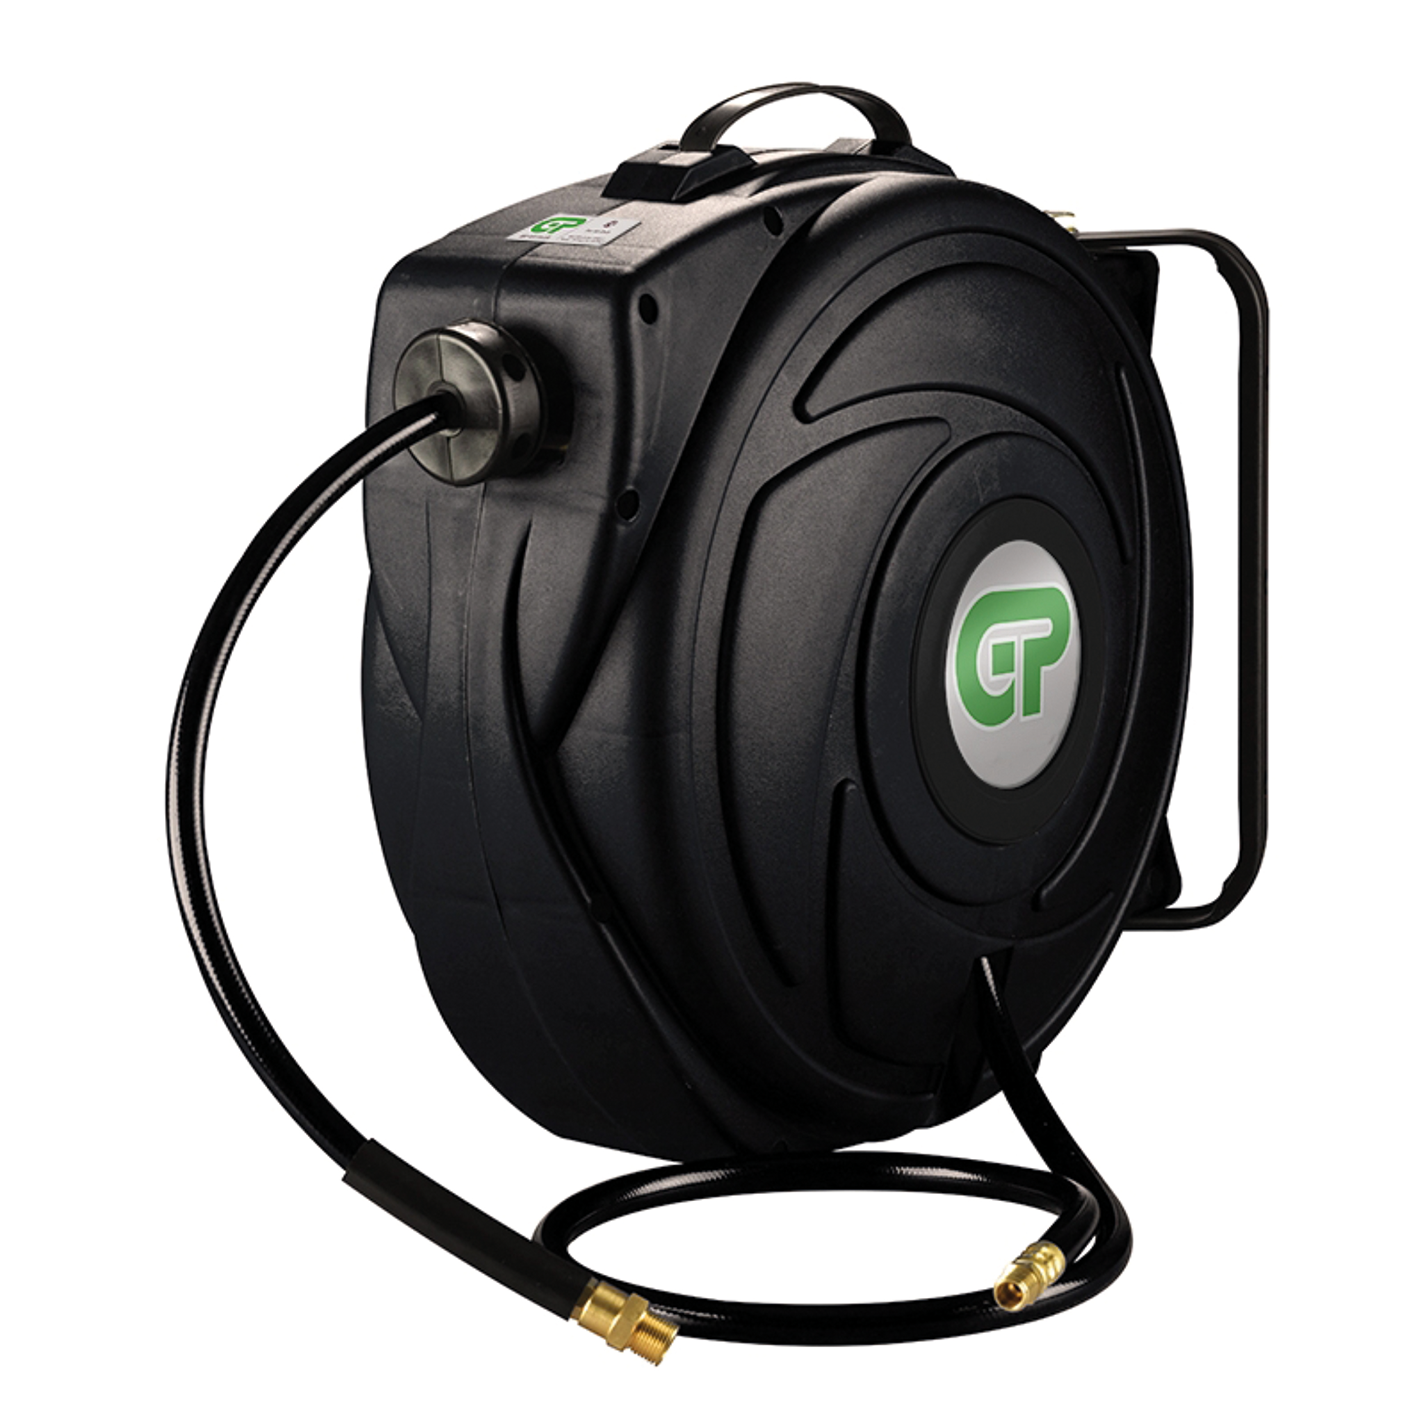 Compact Retractable Air Hose Reel comes with Hose